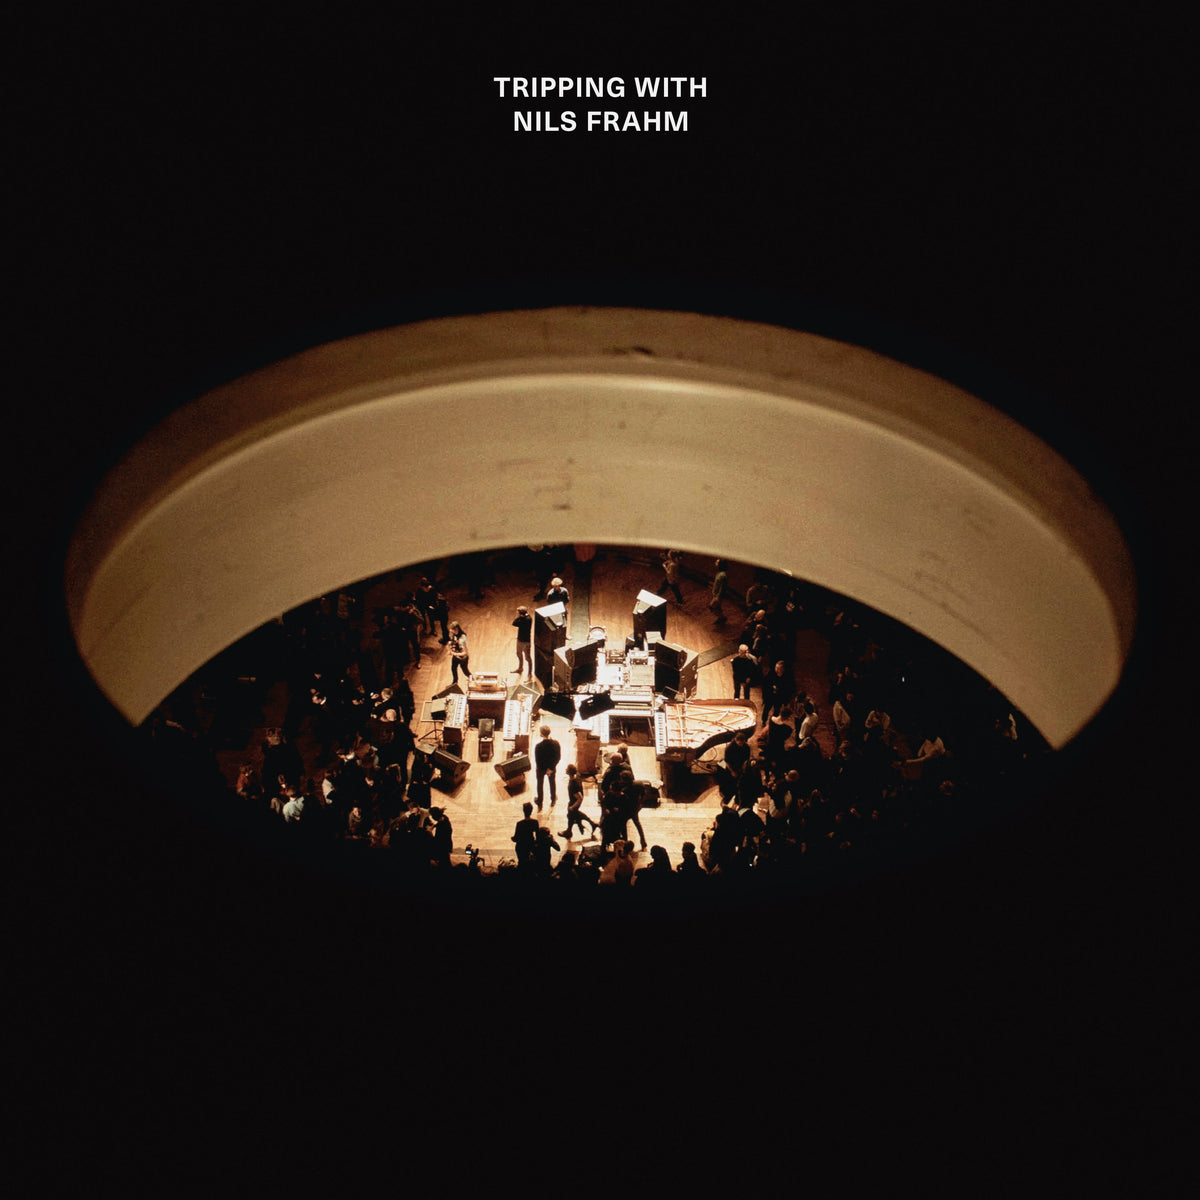 Tripping with Nils Frahm - CD